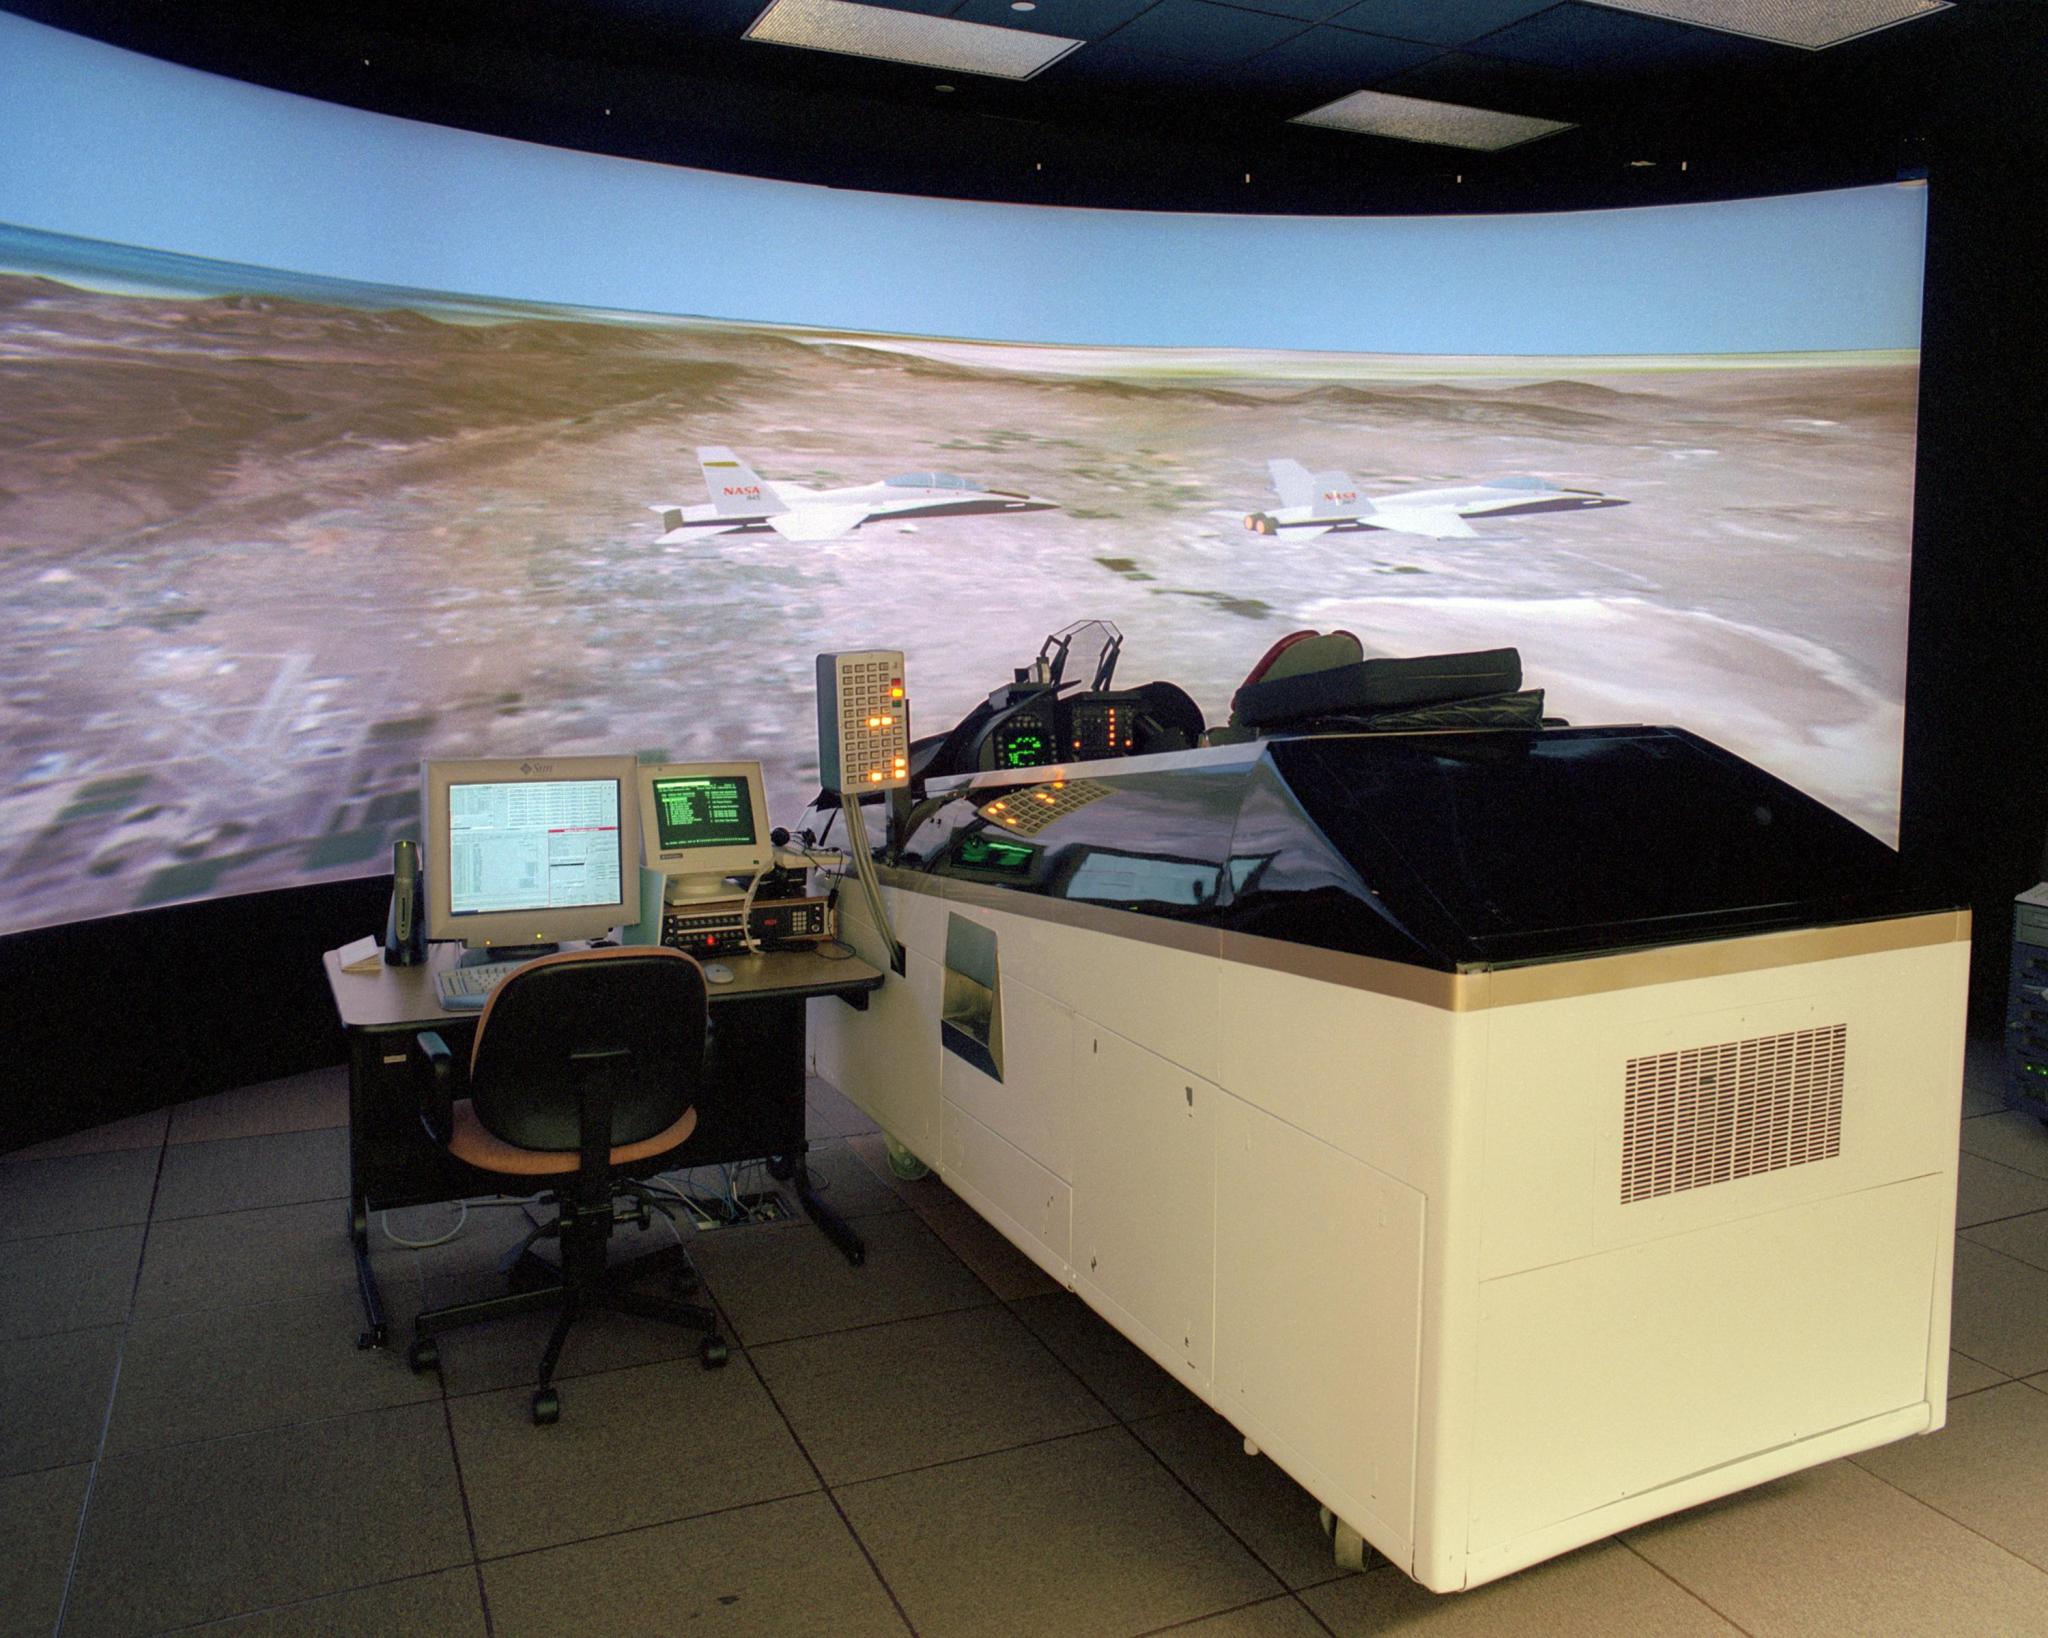 A flight simulator with a large screen showing two plans in flight over land.